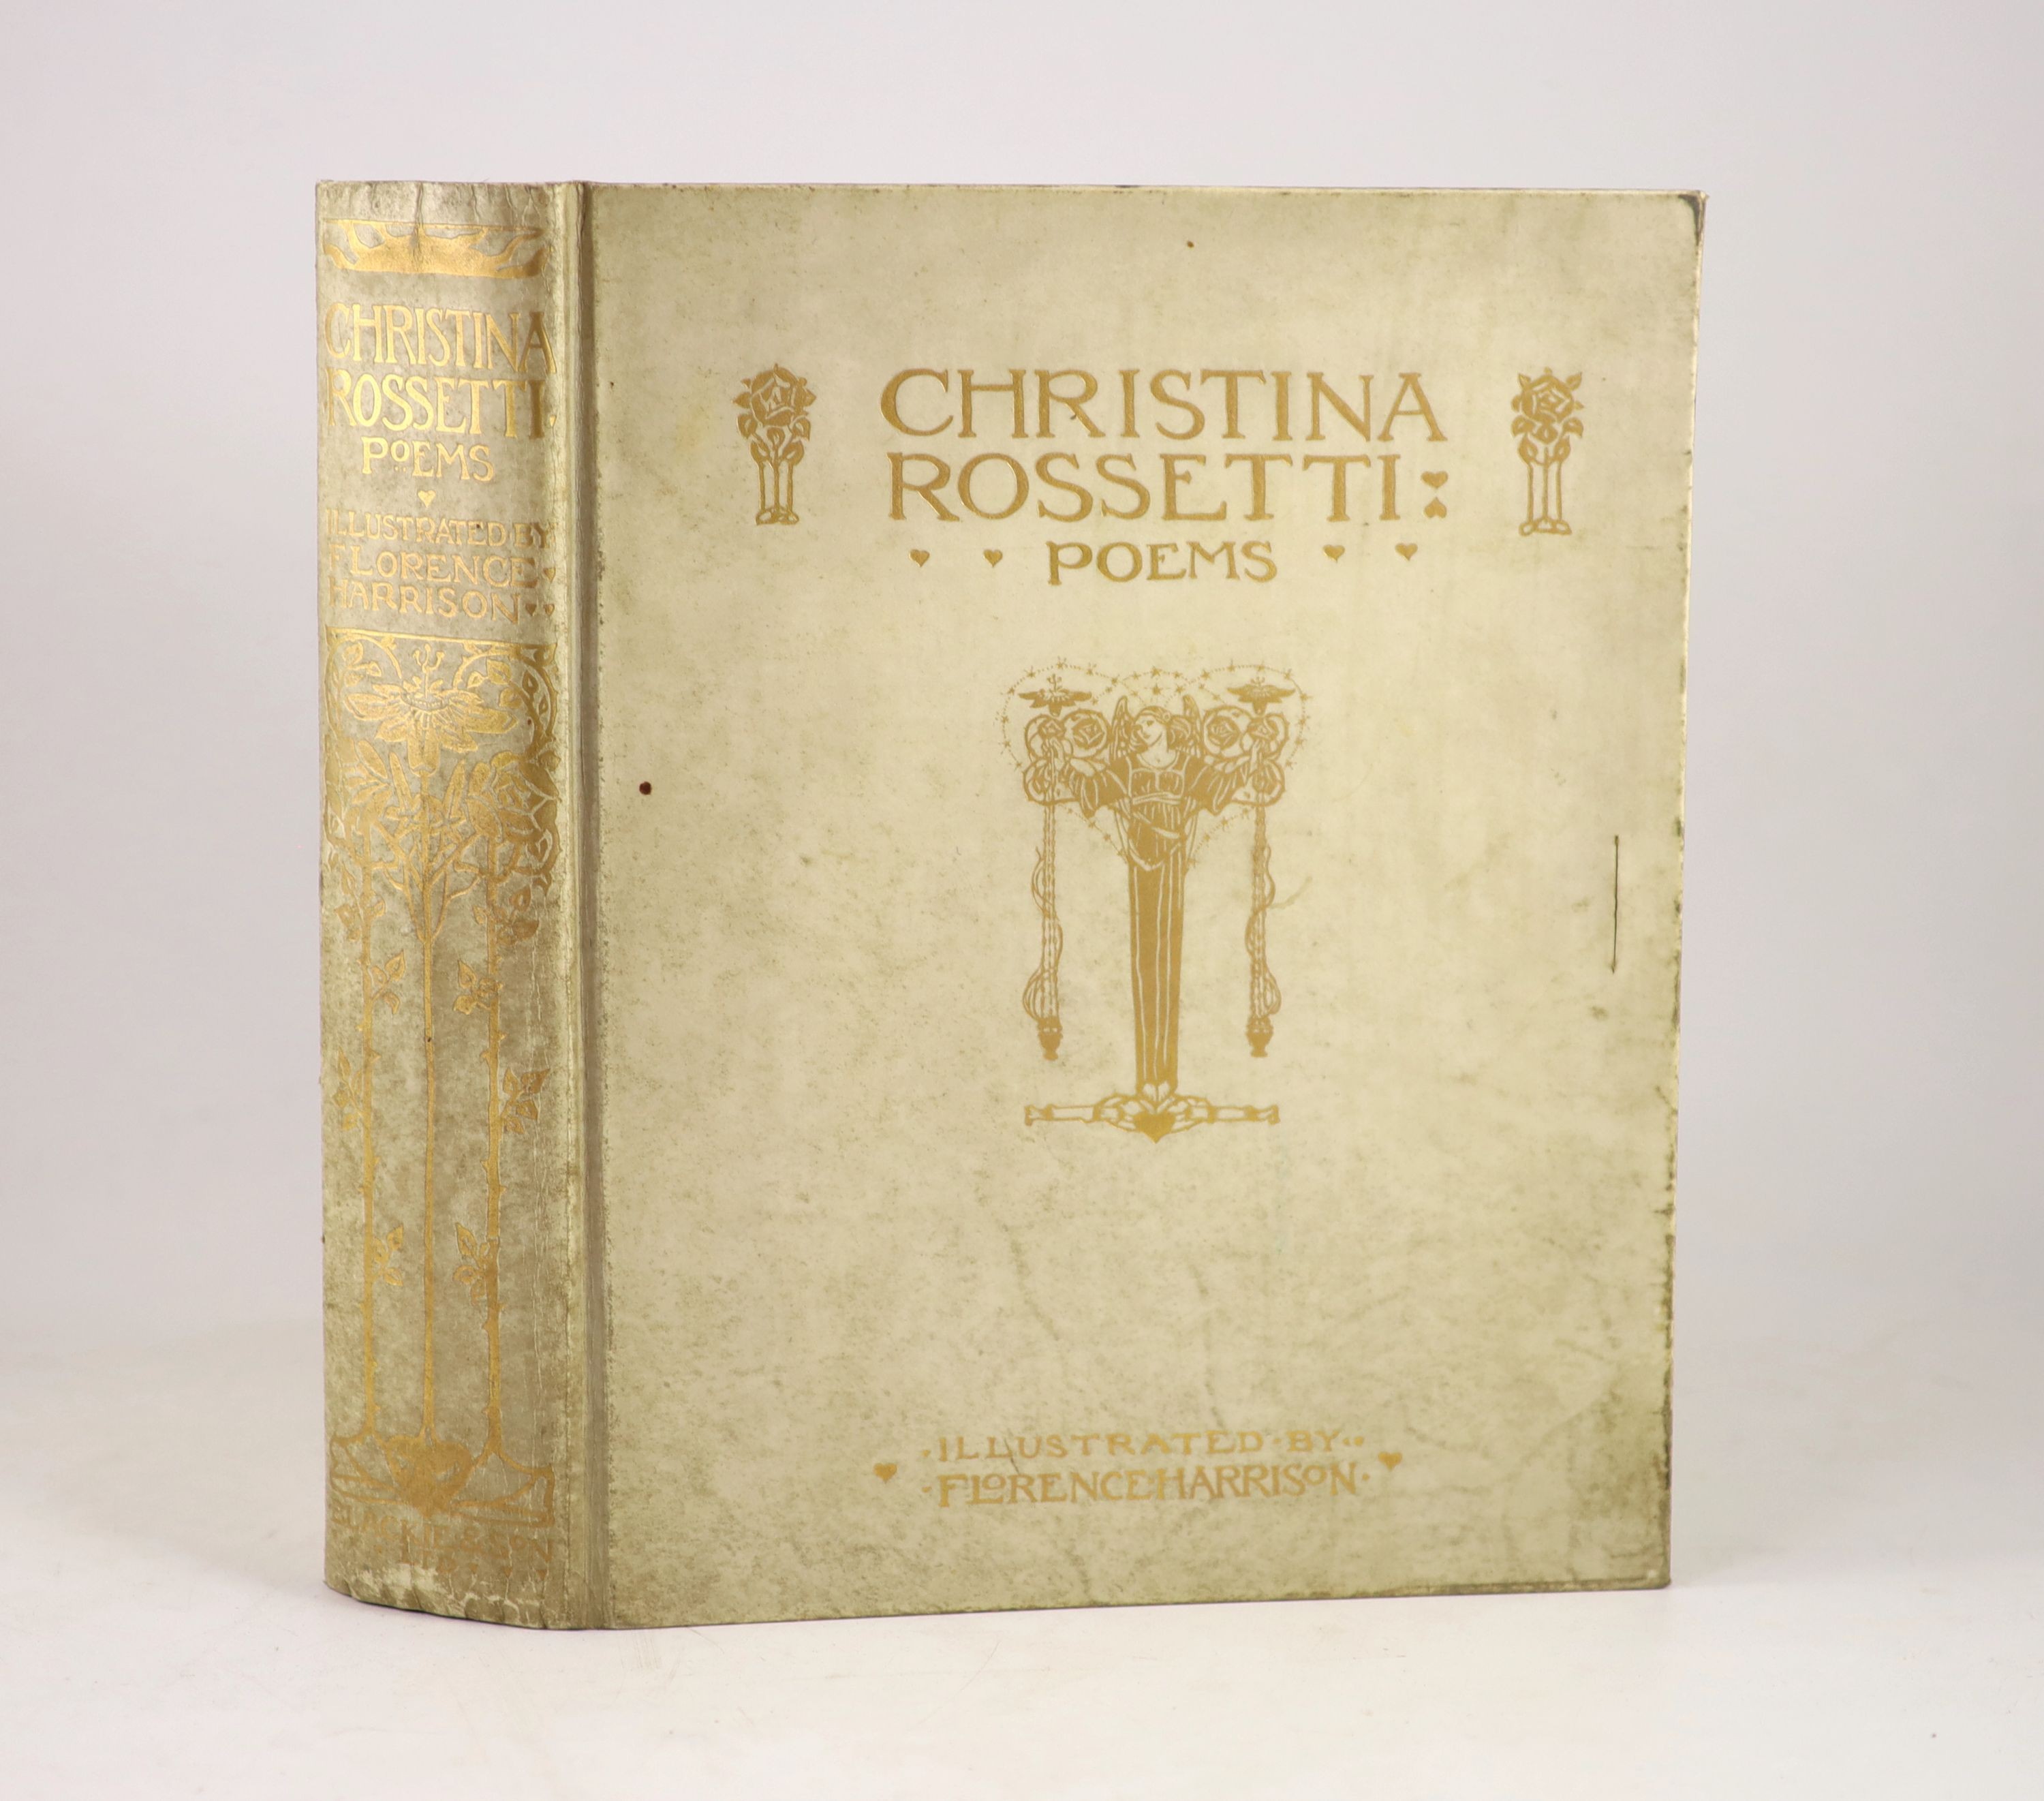 Rossetti, Christina Georgina - Poems, one of 350, illustrated and signed by Florence Harrison, introduction by Alice Meynell, 4to, original vellum gilt, with 35 (of36) tipped-in colour plates and 34 black and white plate